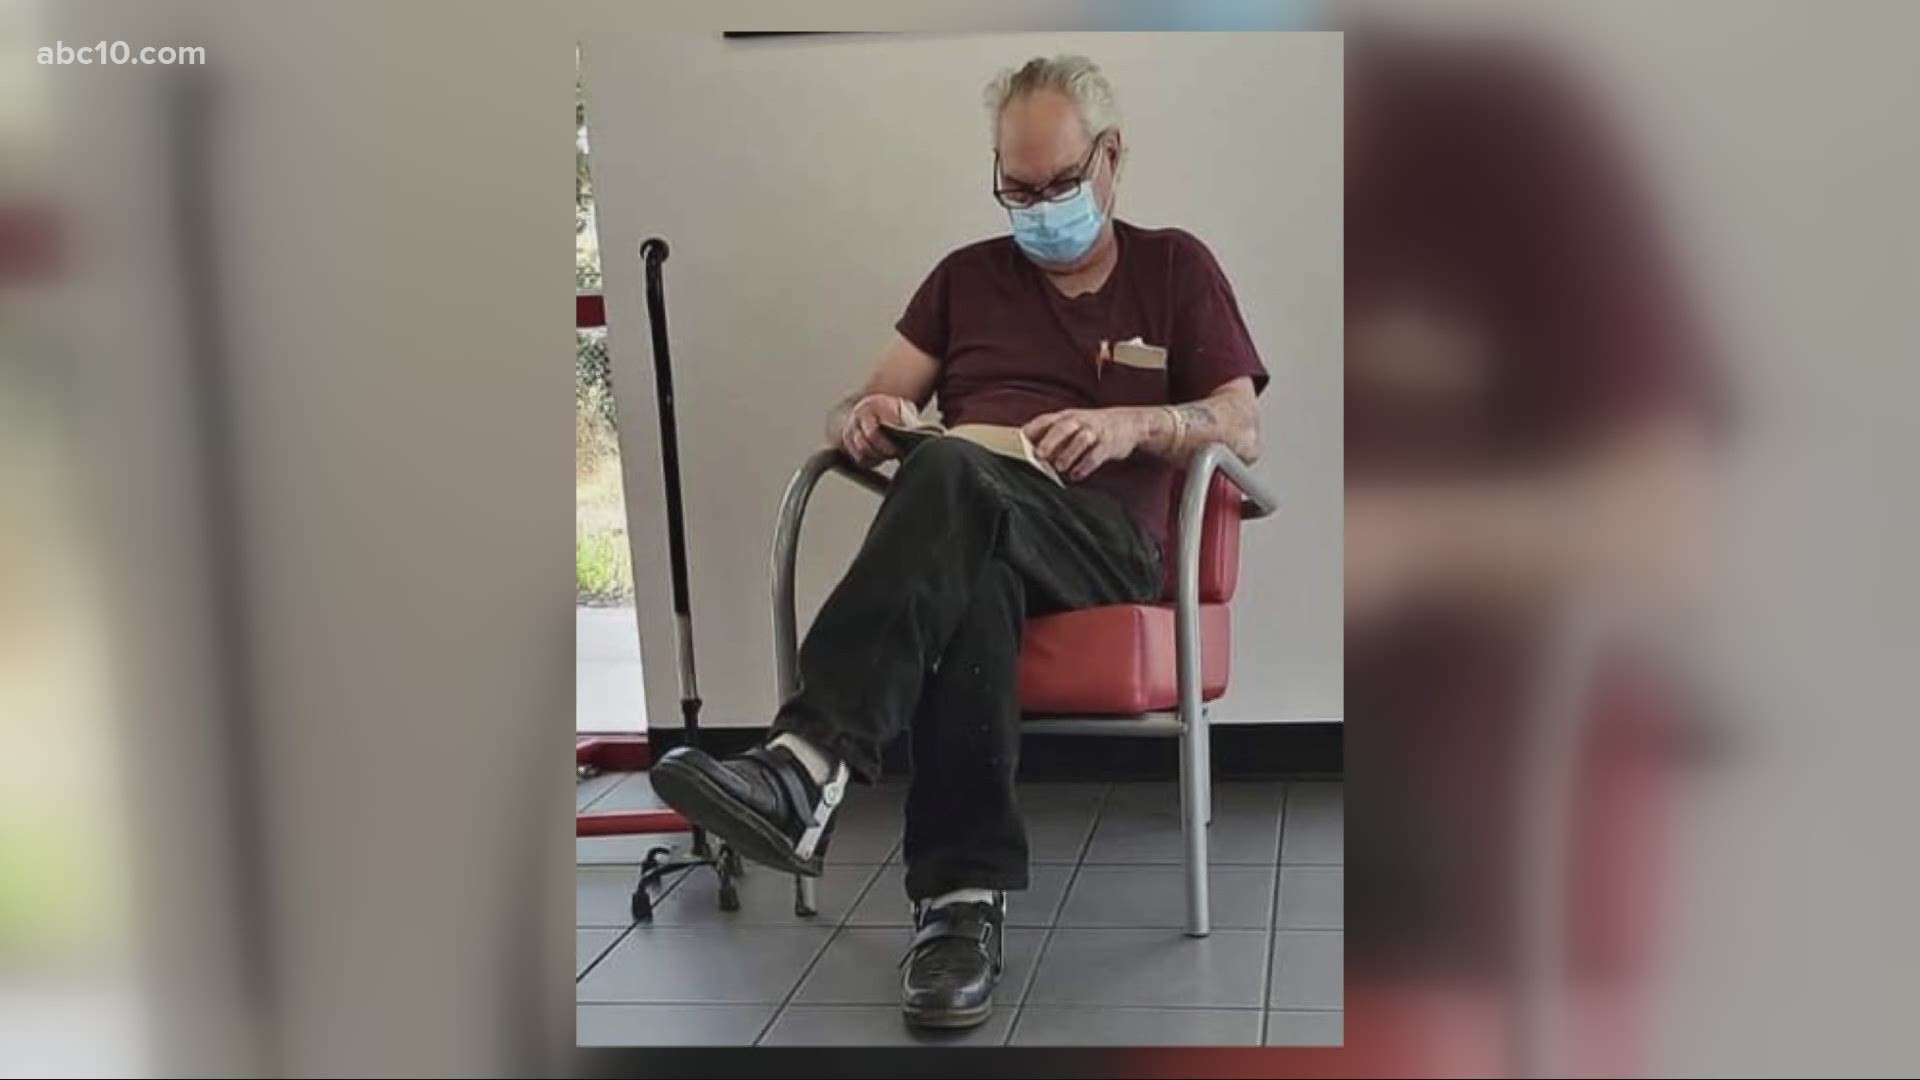 ABC10's Kevin John spoke with Leighann Fontenot about why she wears a mask for her father, and why everyone else should consider wearing a mask.